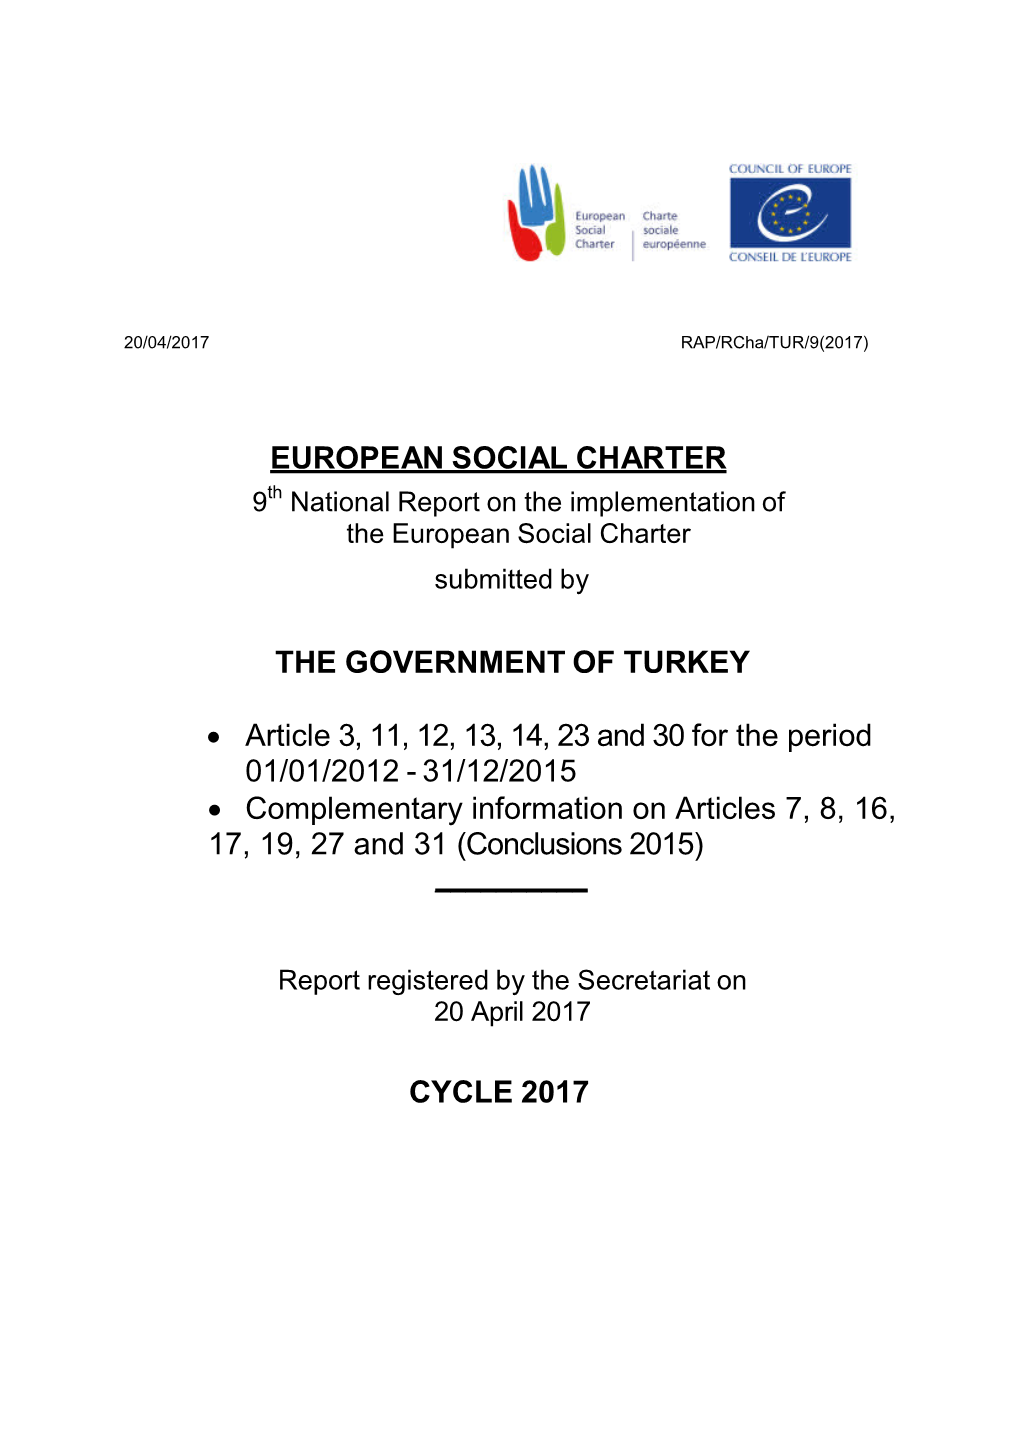 European Social Charter the Government of Turkey